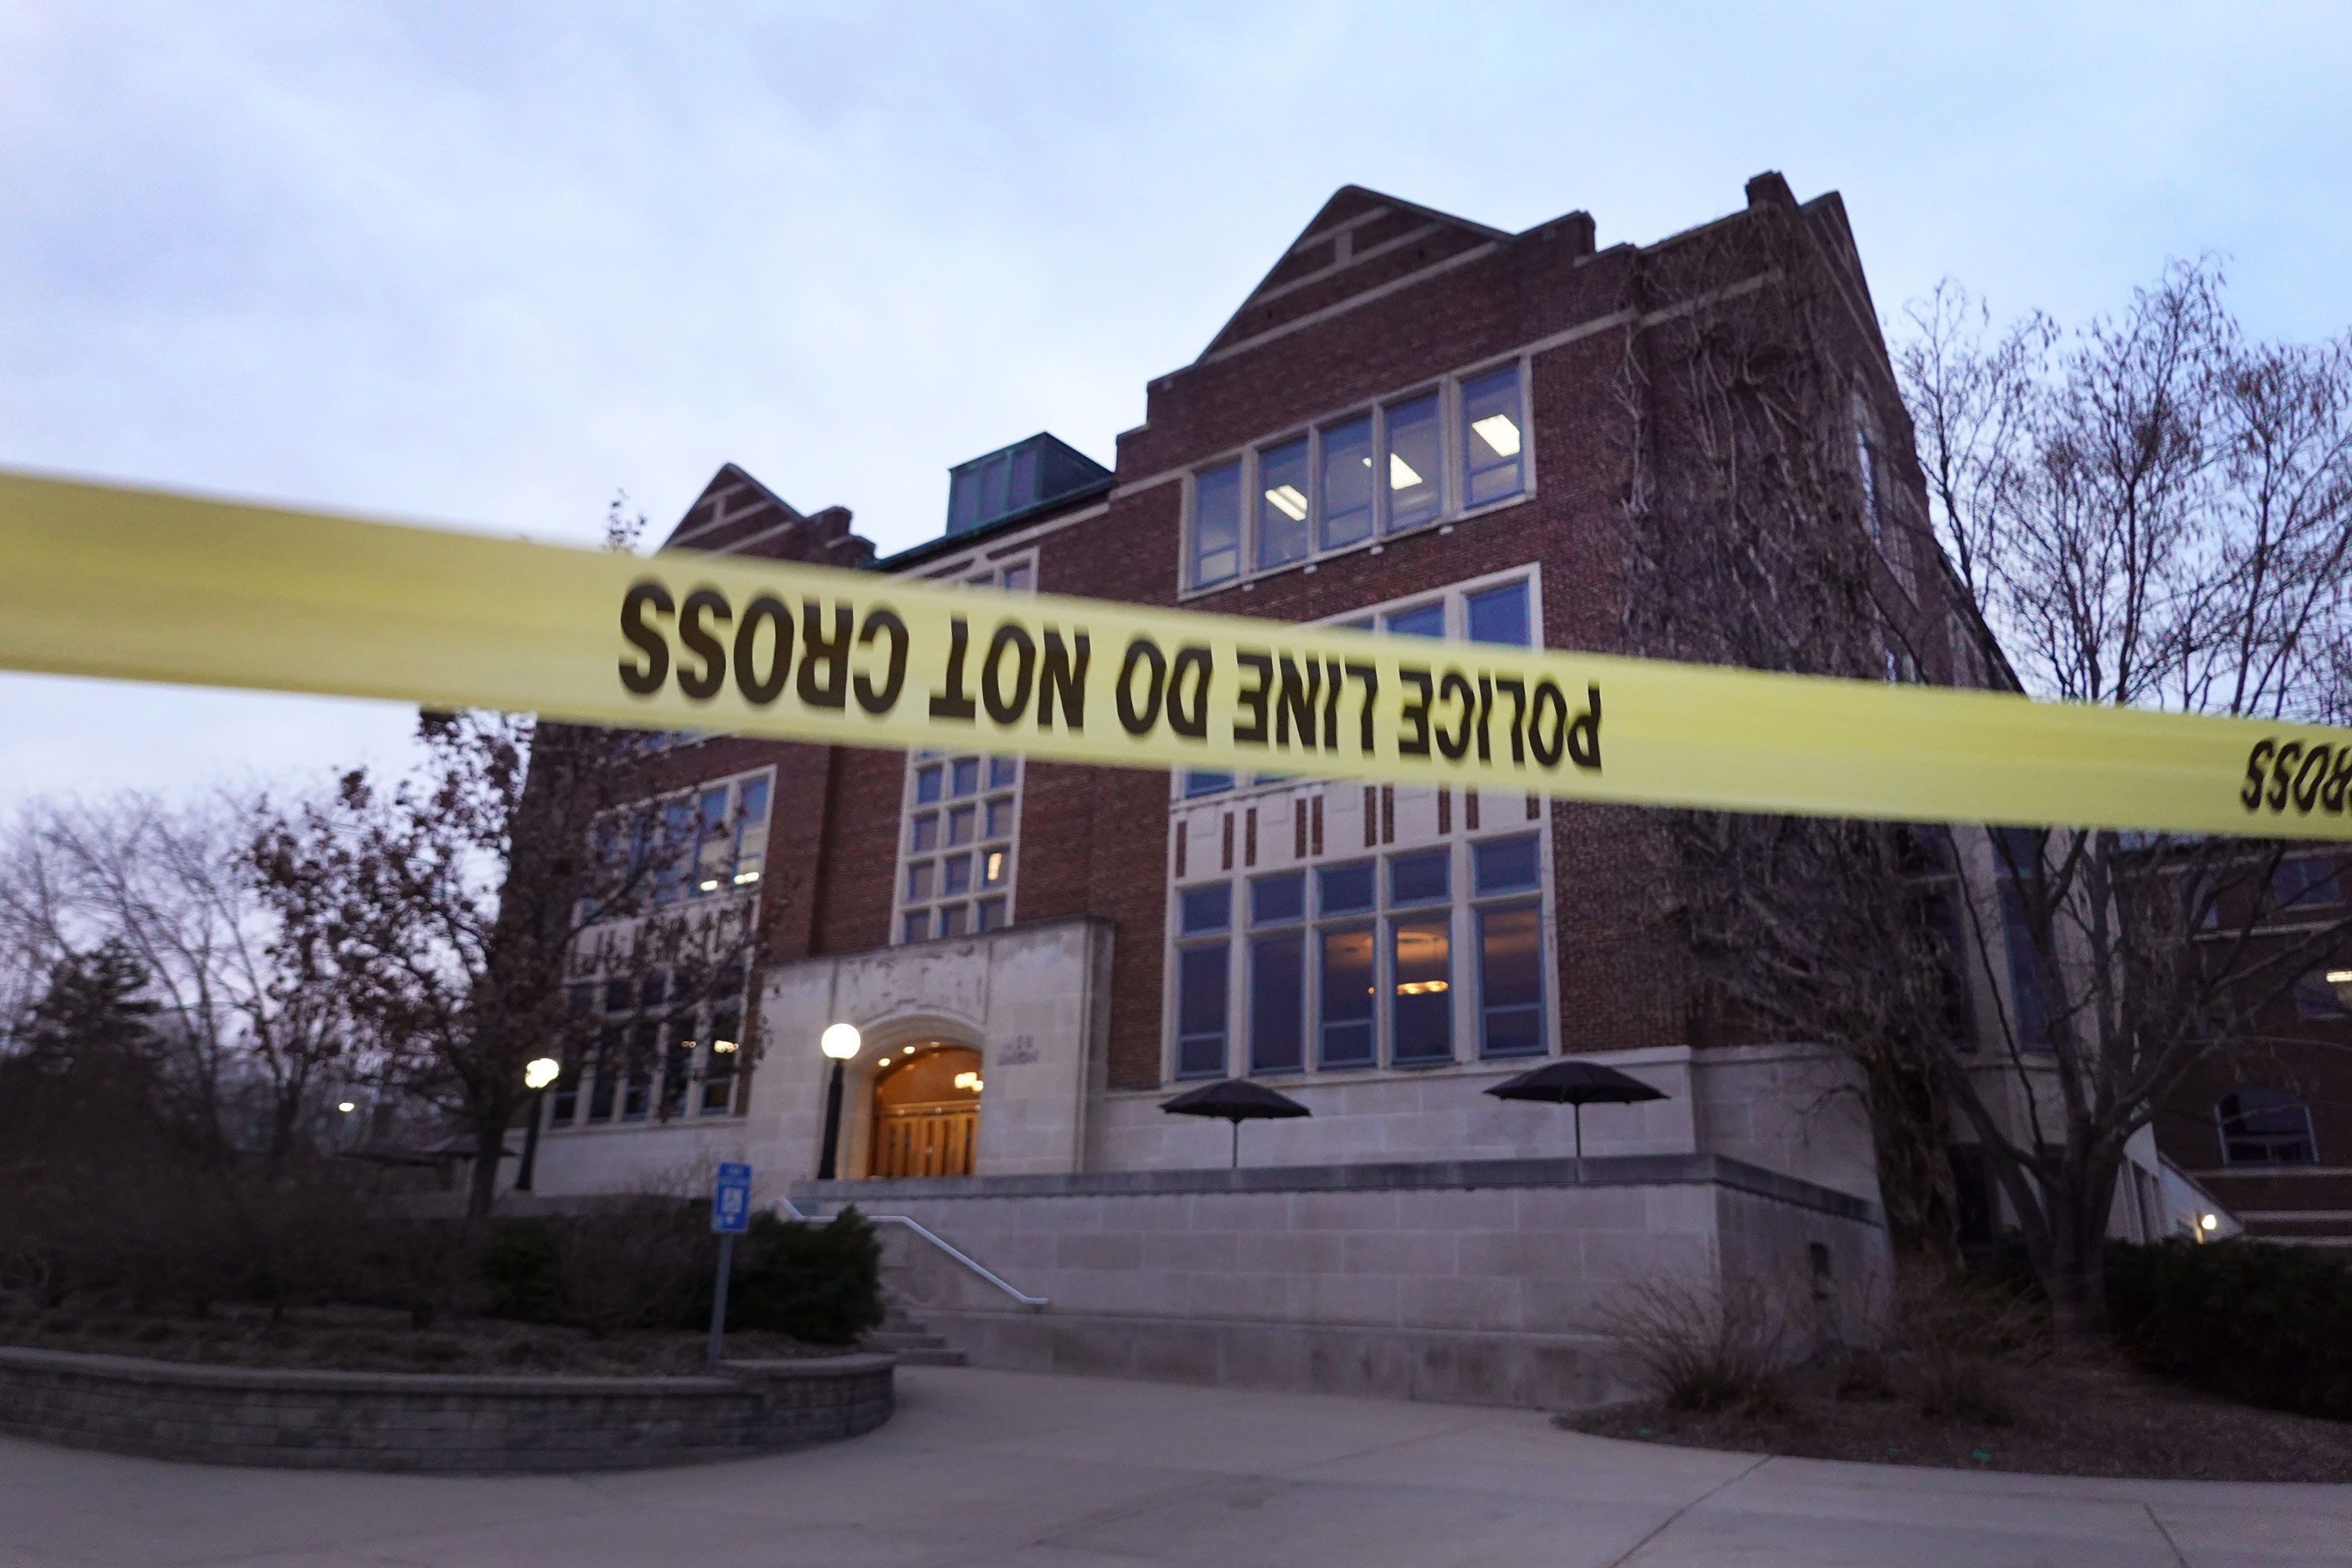 Crime scene tape surrounds the Student Union building on the campus of Michigan State University on Tuesday.